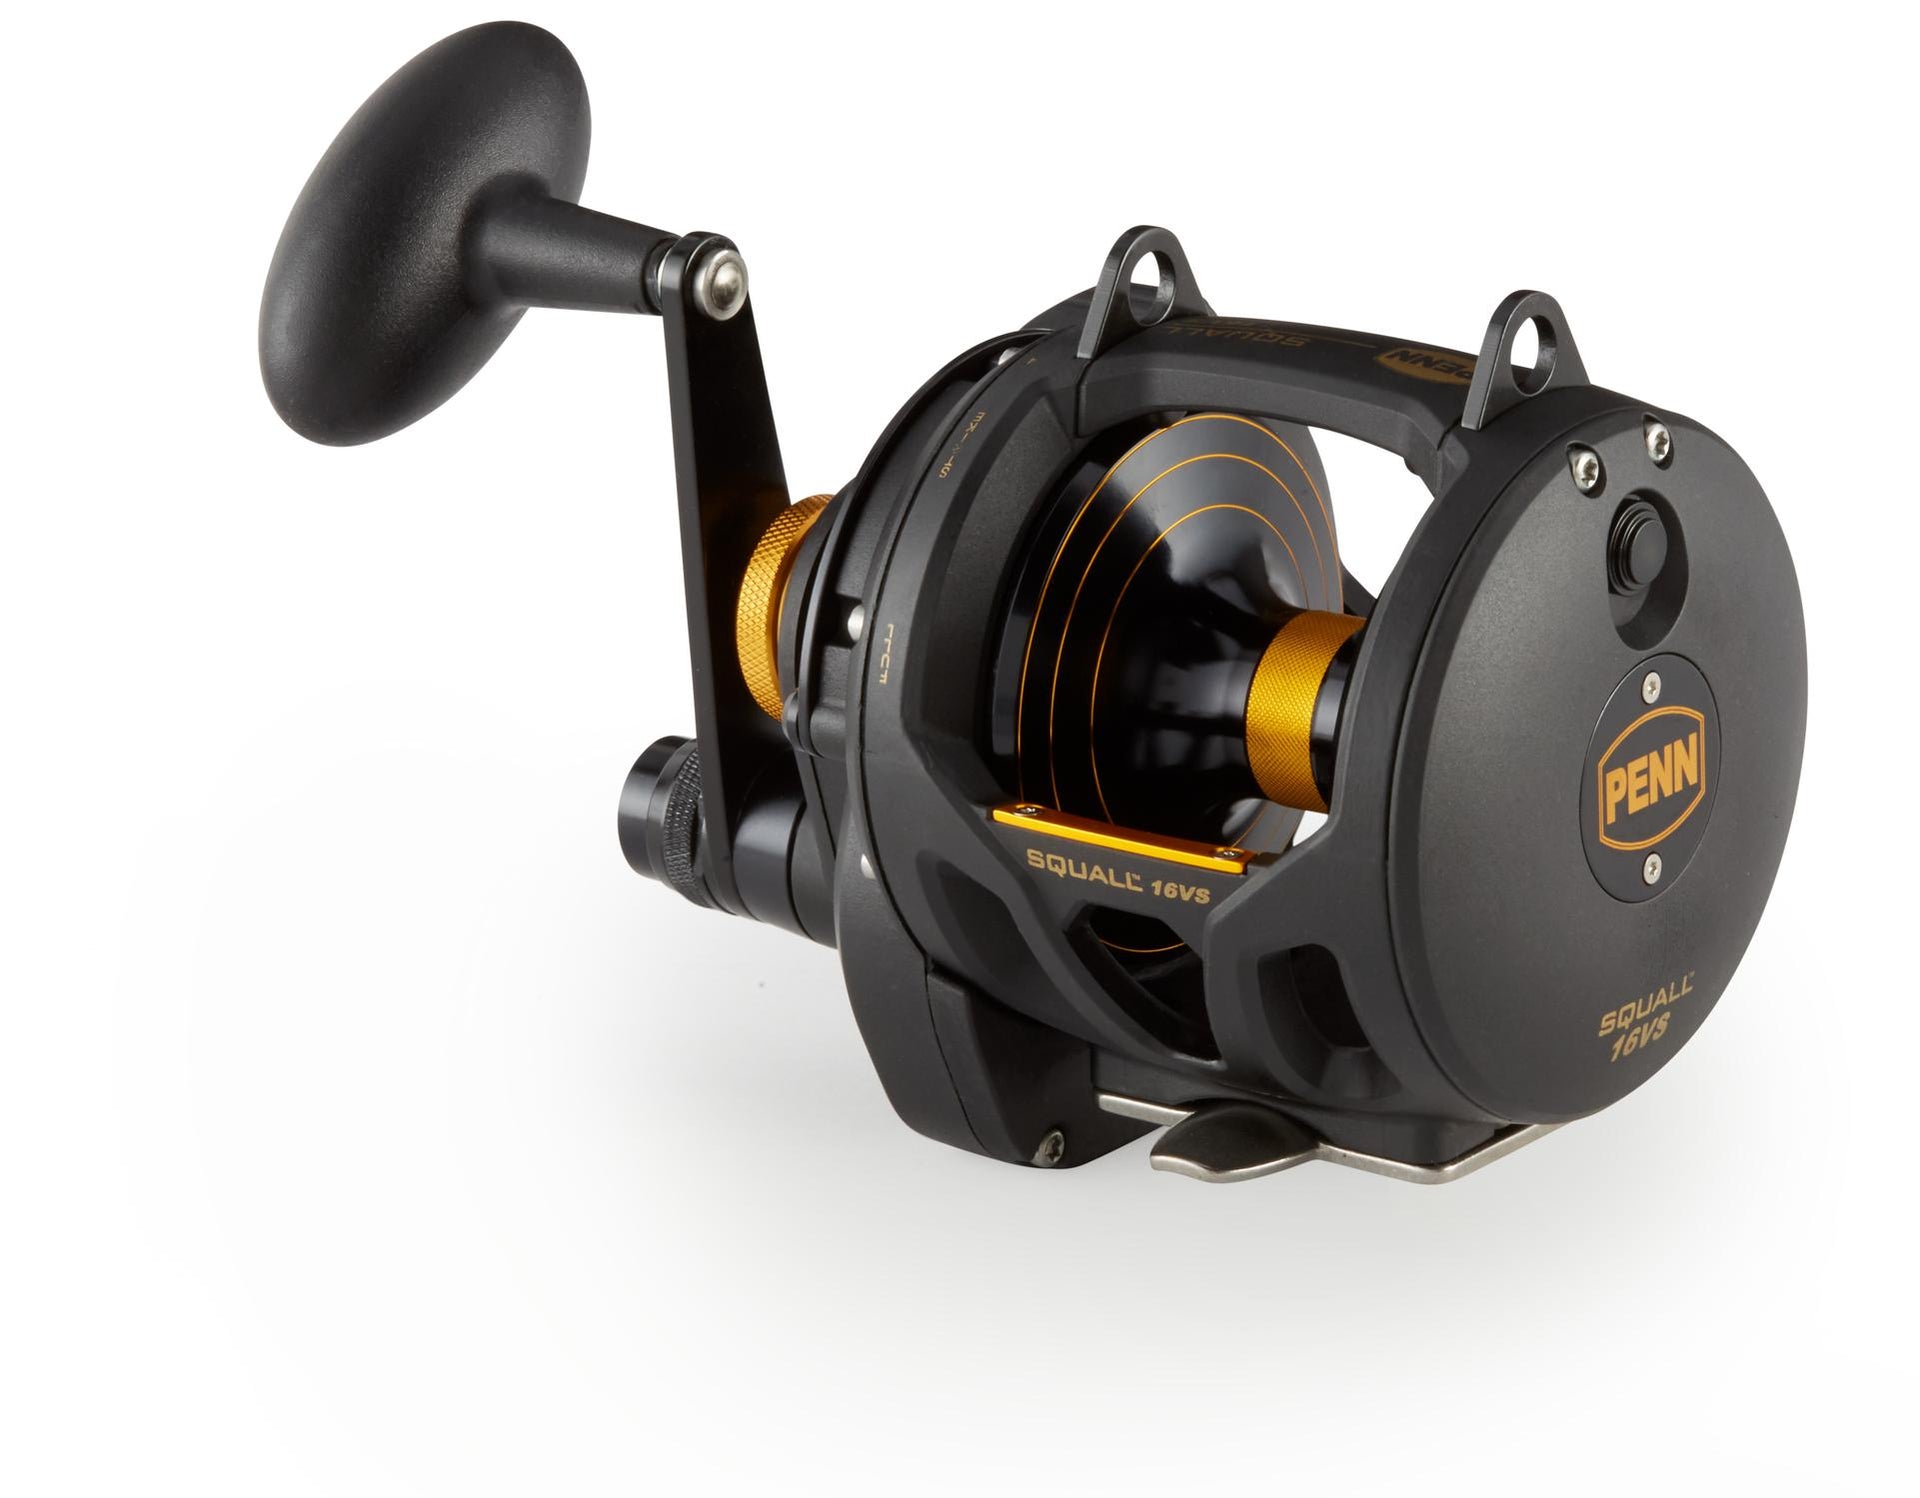 PENN Squall II 15 Star Drag CS Conventional Reel Select Right or